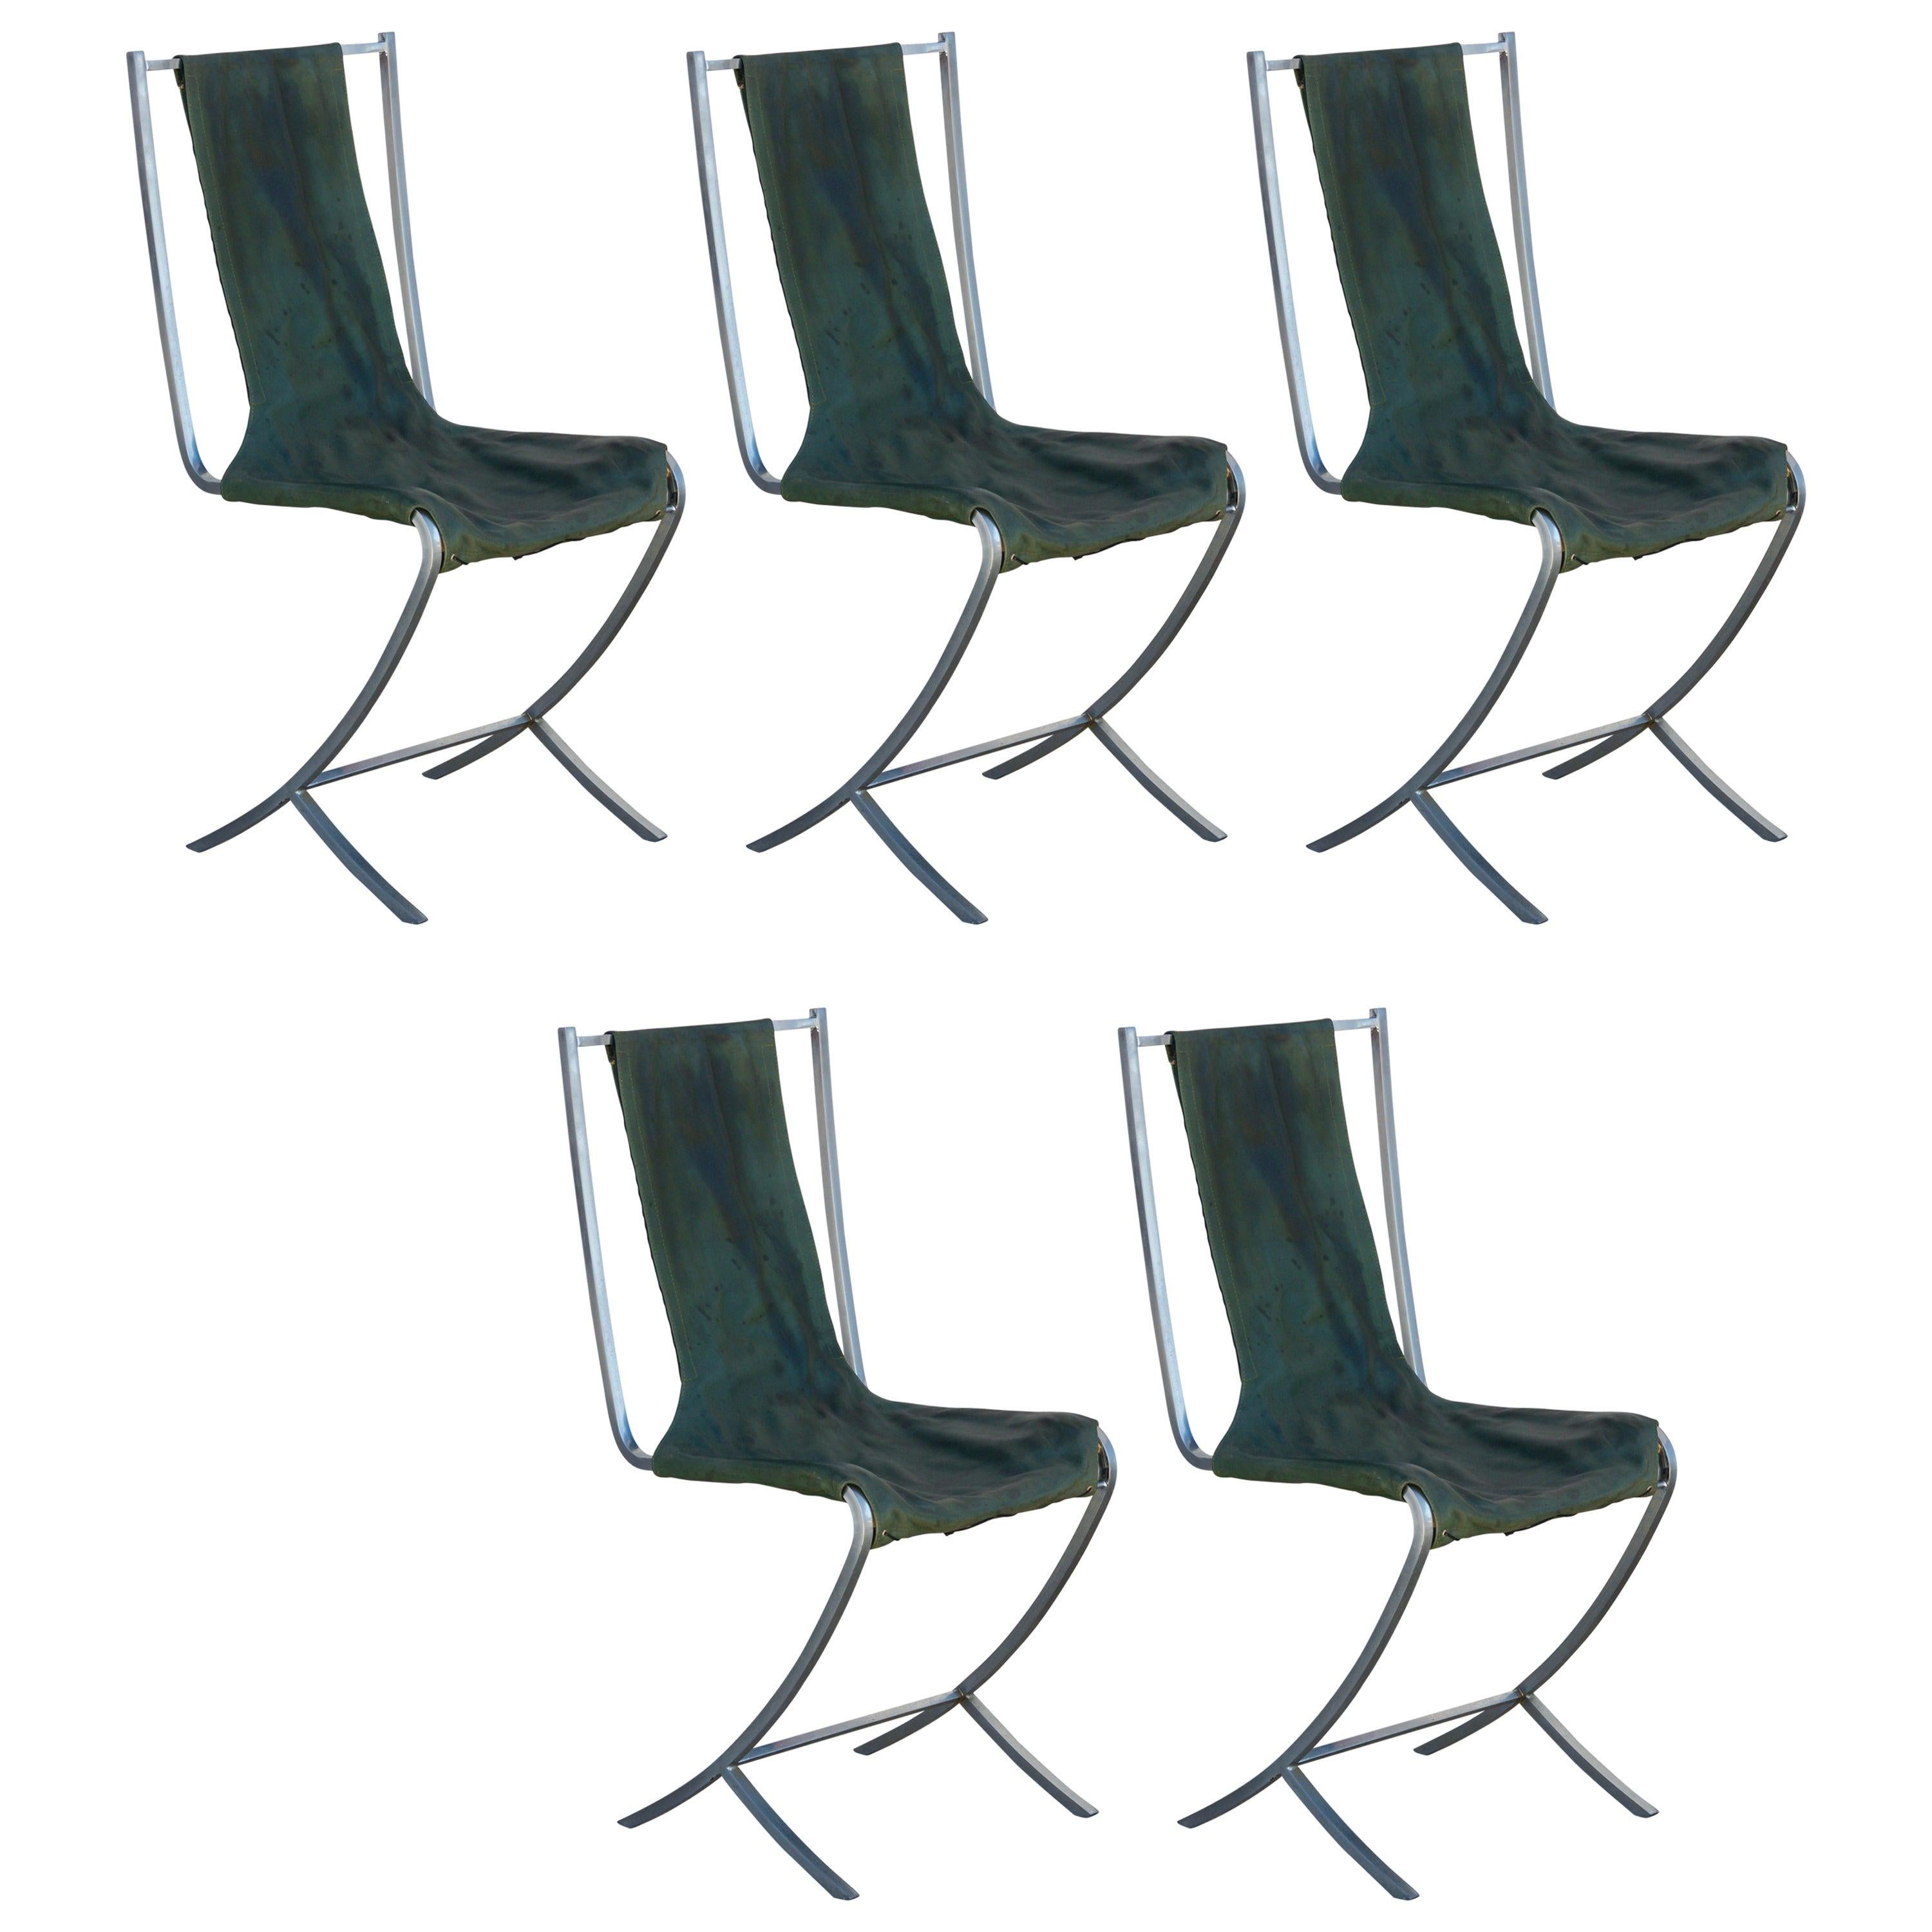 Rare Set of Five Stainless Steel Chairs by Maison Jansen